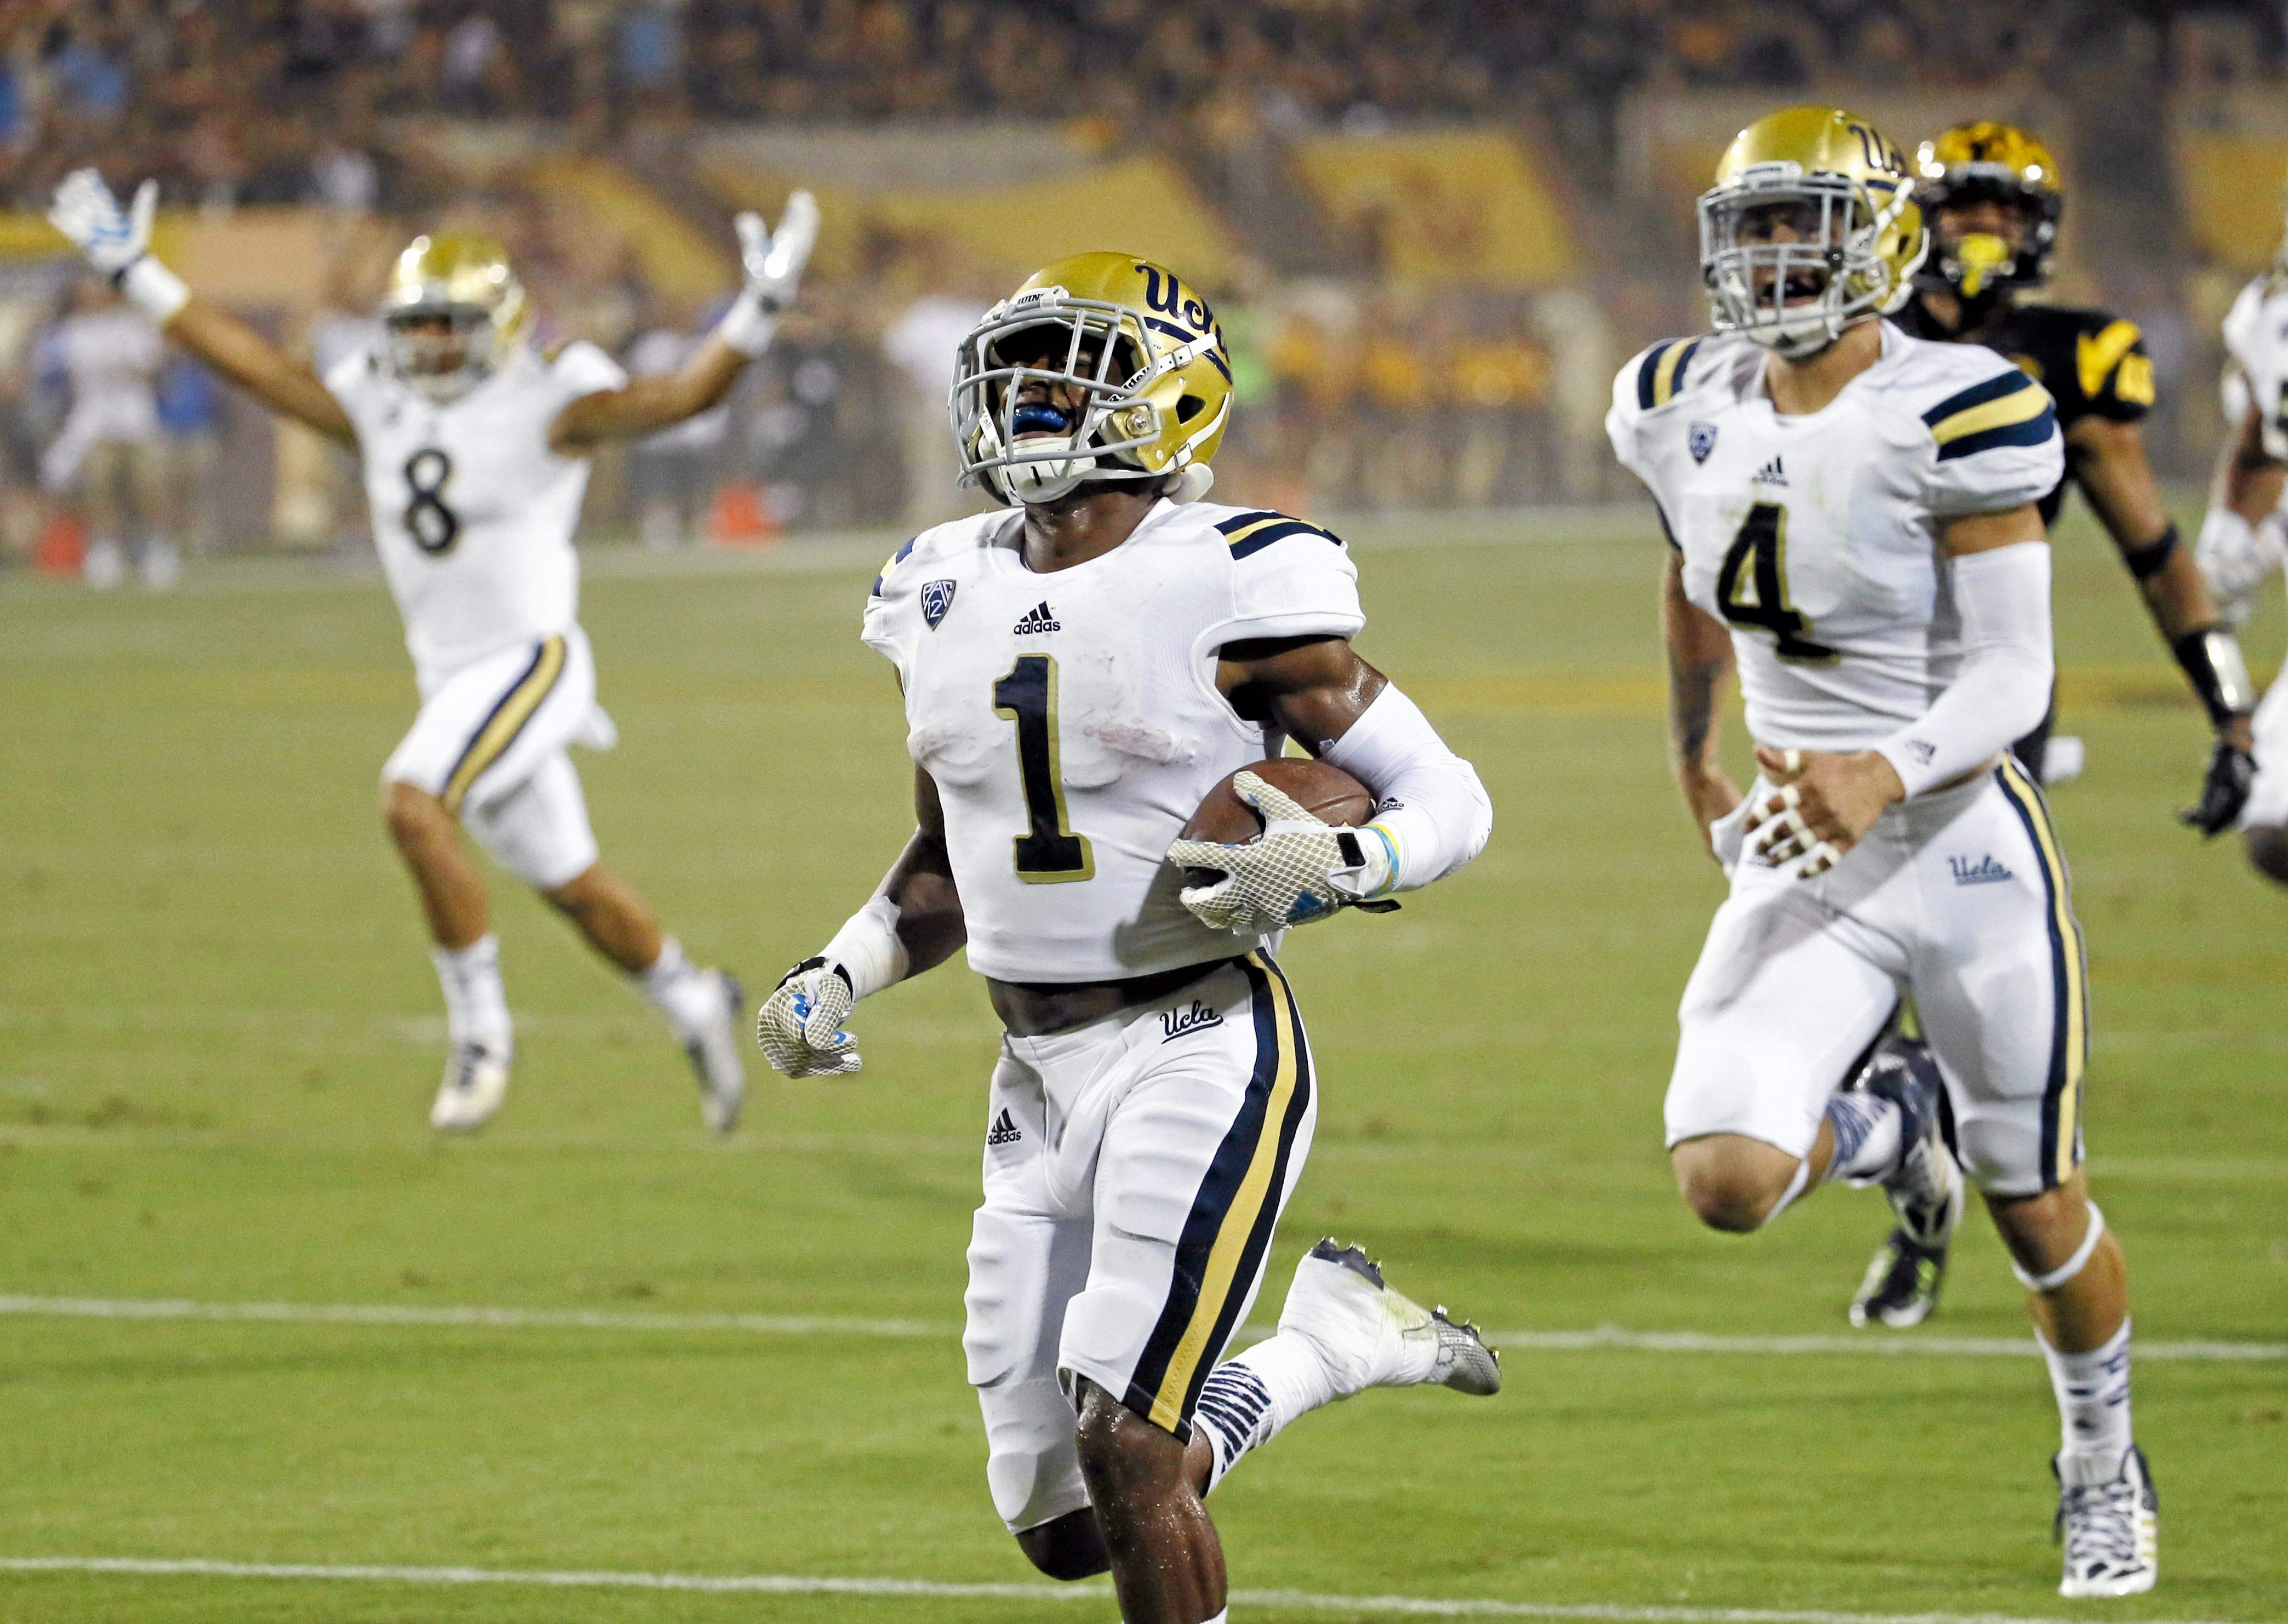 UCLA's Ishmael Adams (1) returns a kickoff 100 yards for a touchdown against Arizona State during the second half of an NCAA college football game, Thursday, Sept. 25, 2014, in Tempe, Ariz. (AP Photo/Matt York) 